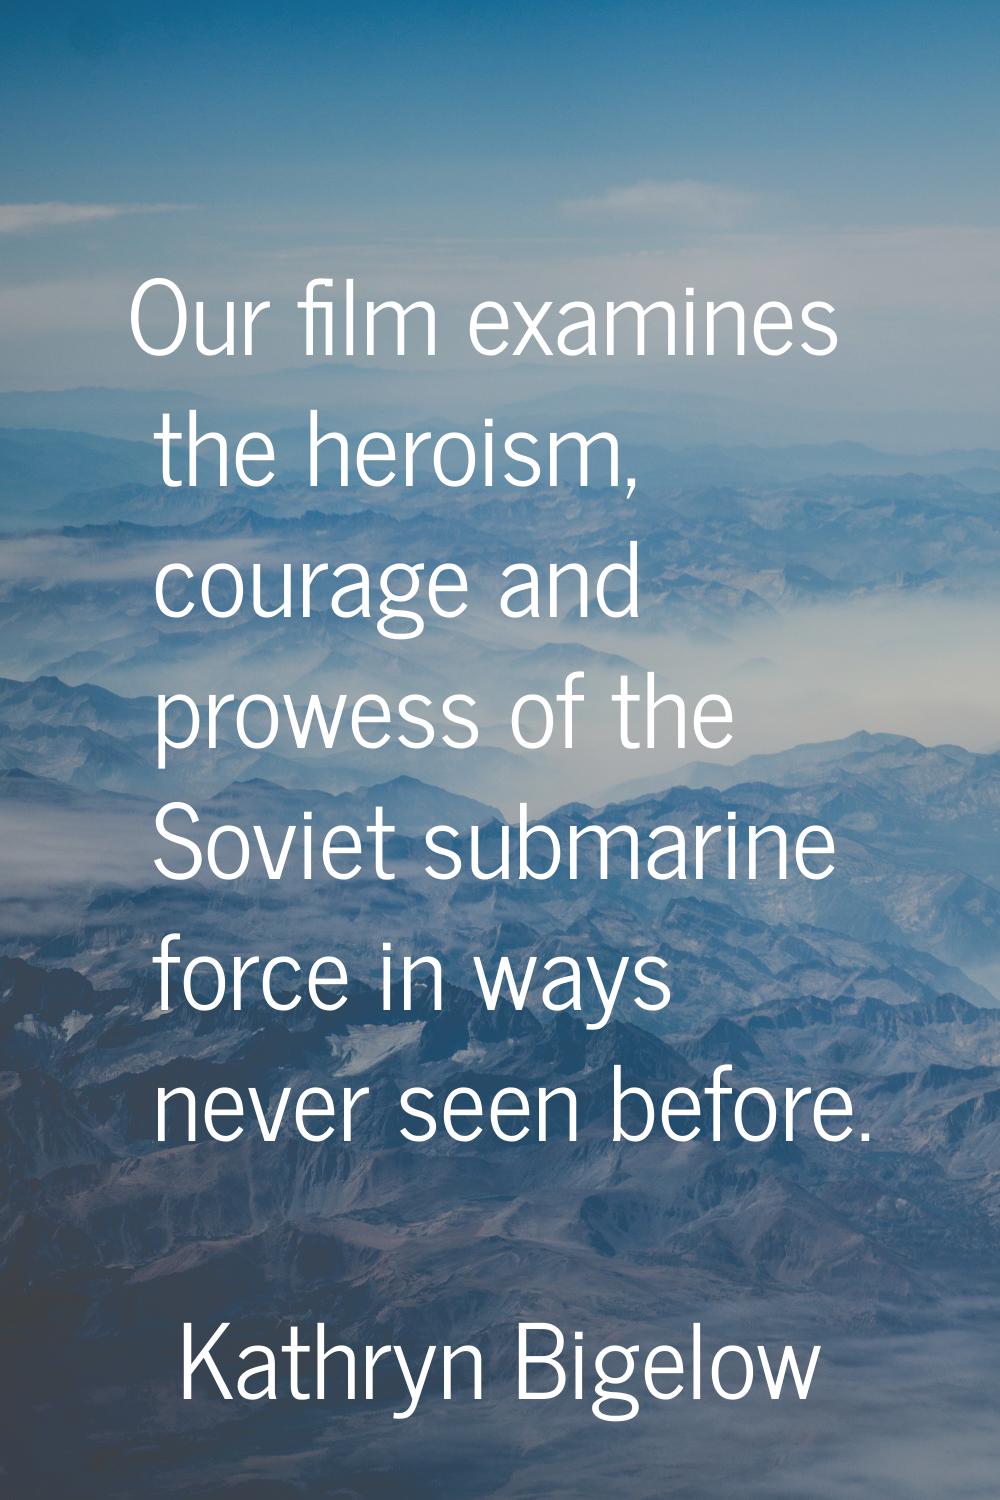 Our film examines the heroism, courage and prowess of the Soviet submarine force in ways never seen